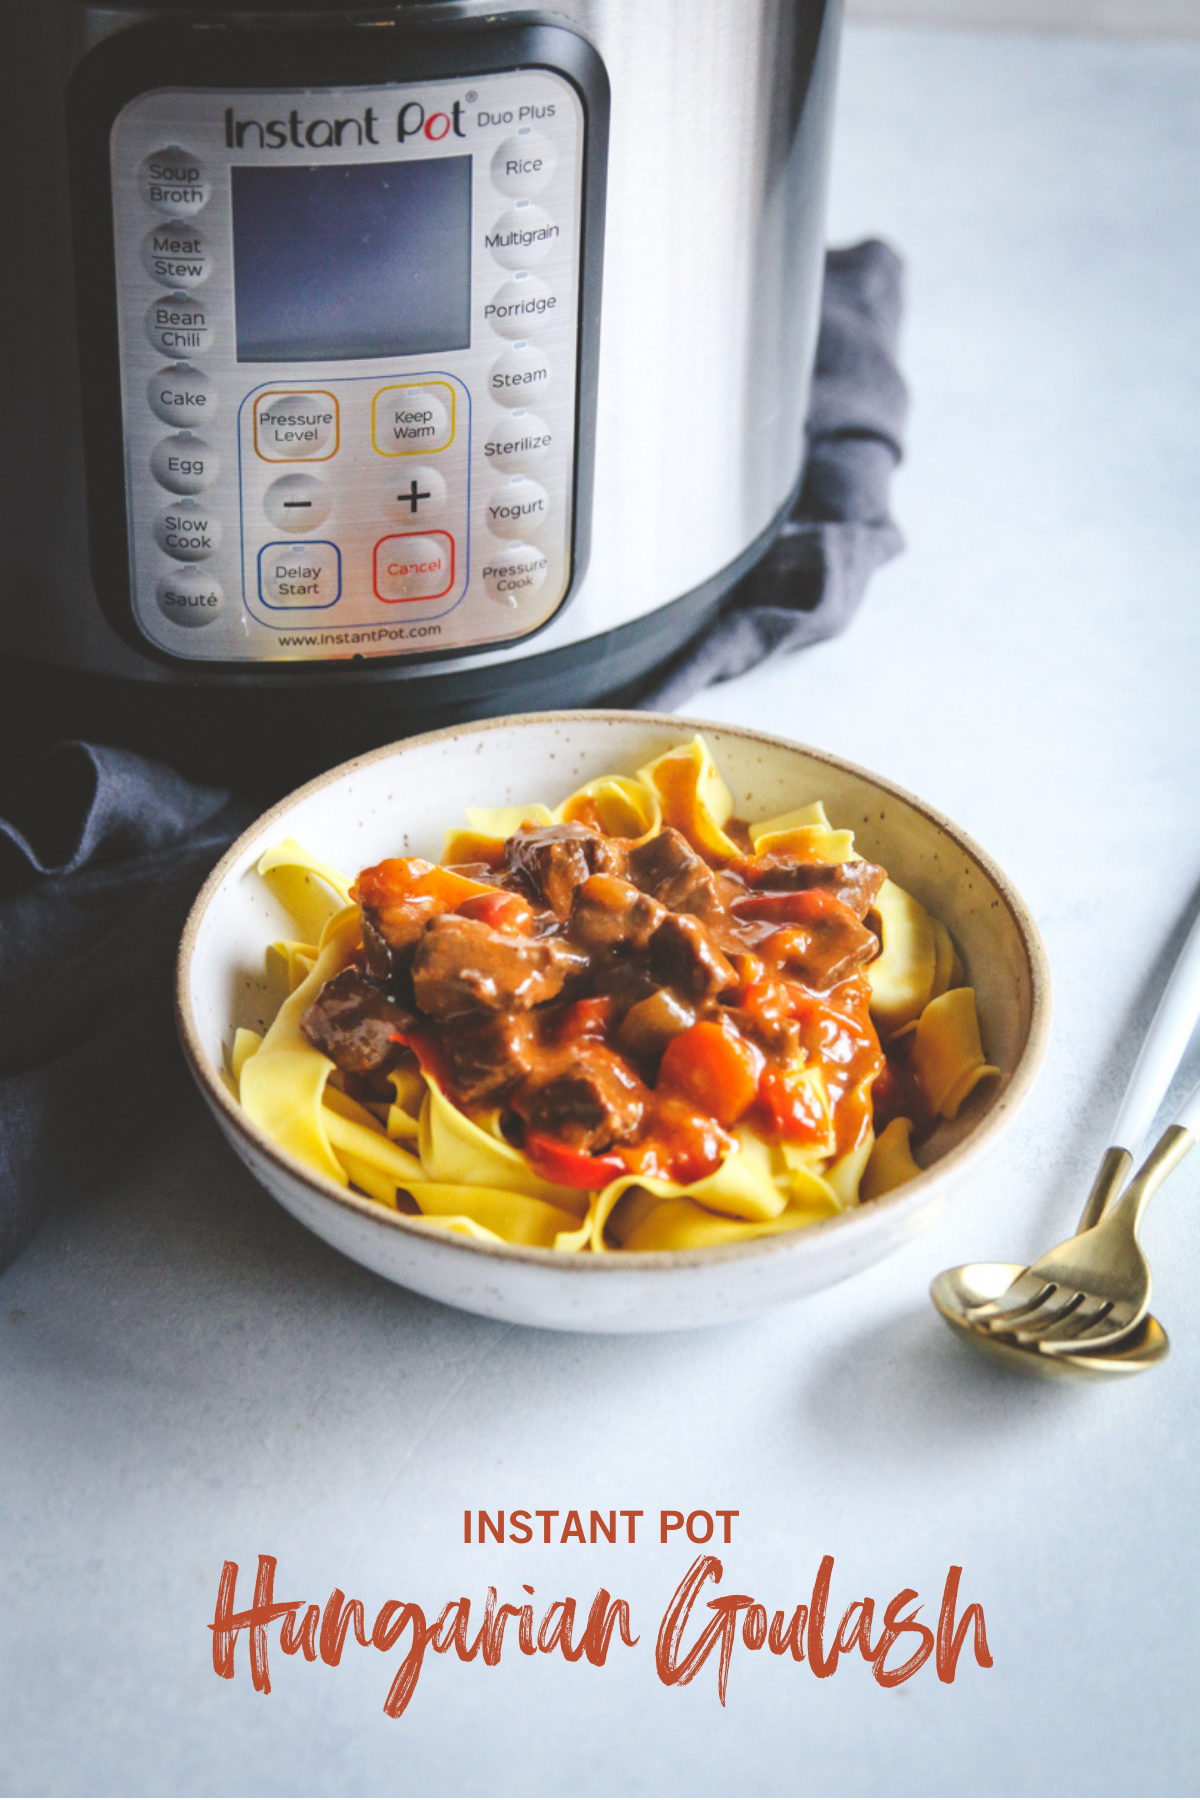 Bowl of Goulash with Instant Pot